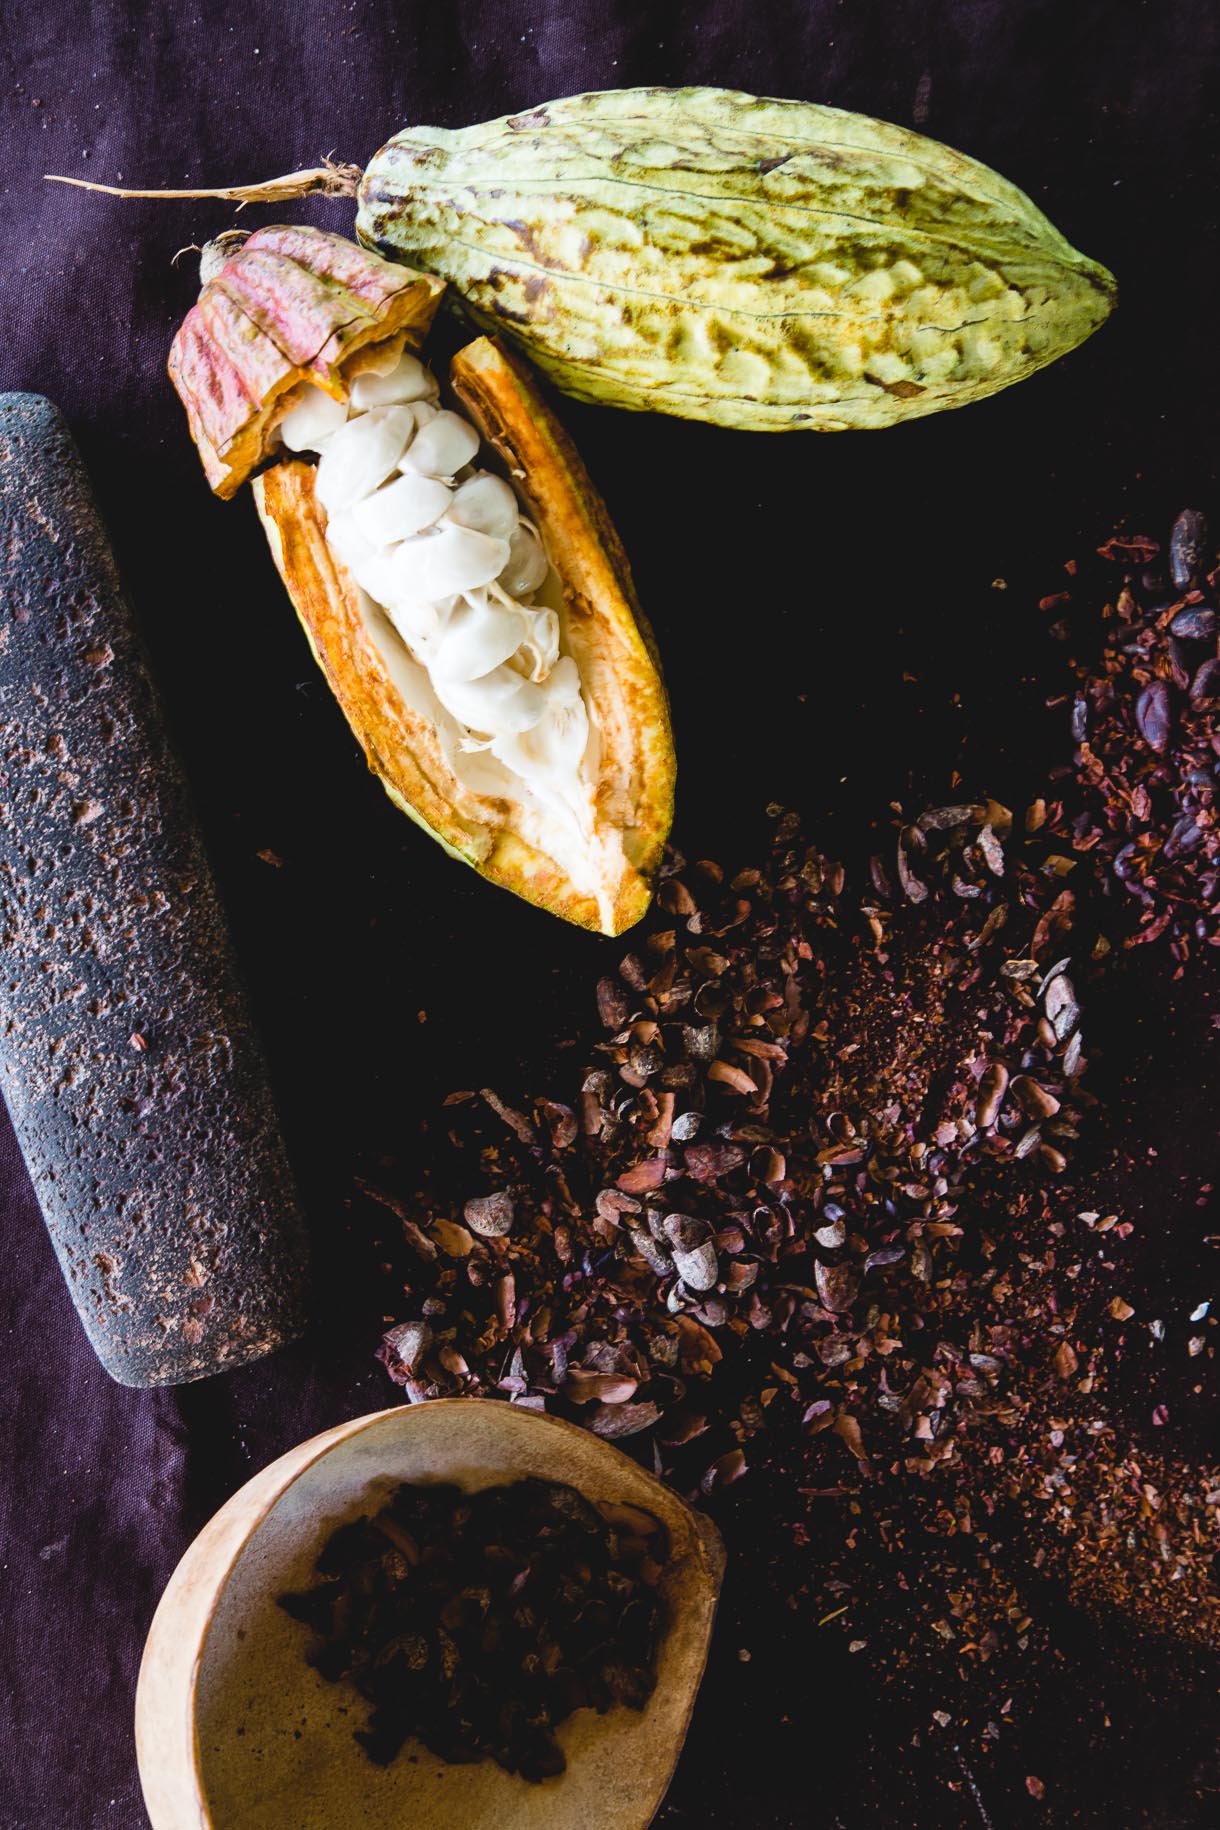 Making Chocolate from Bean to Bar - Ixcacao Chocolate